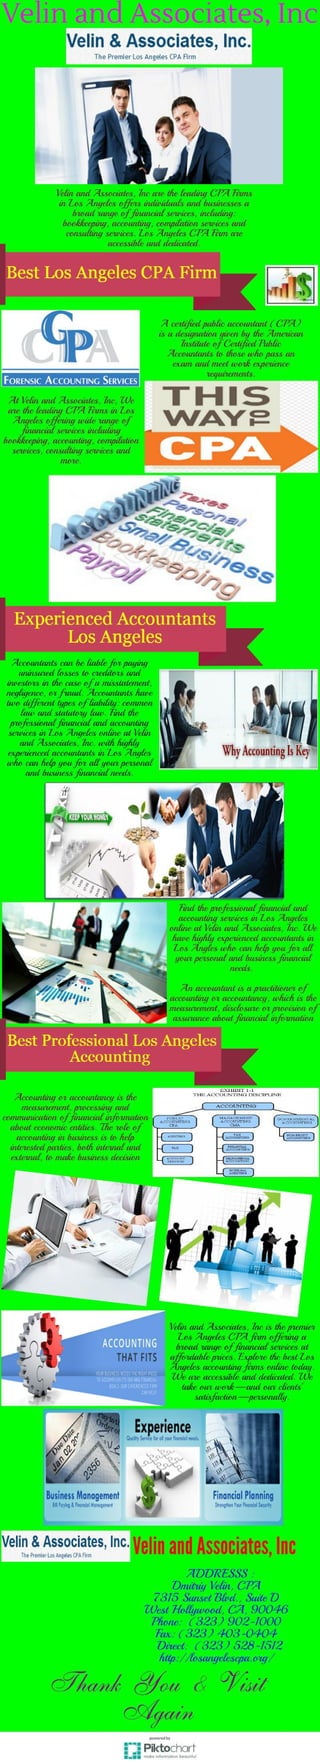 Experienced Professional Los Angeles Accounting Firms